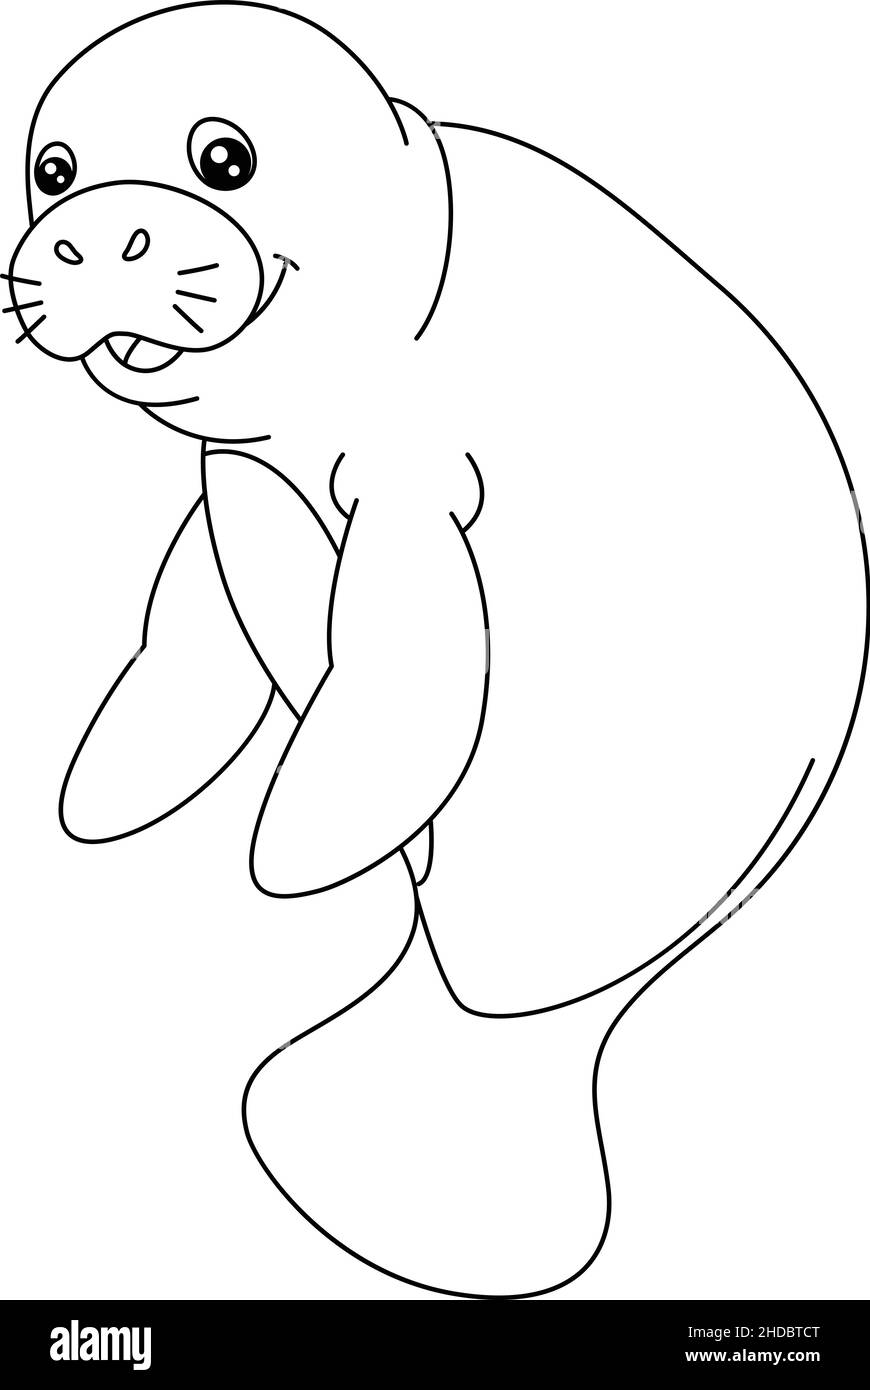 Manatee Coloring Page Isolated for Kids Stock Vector